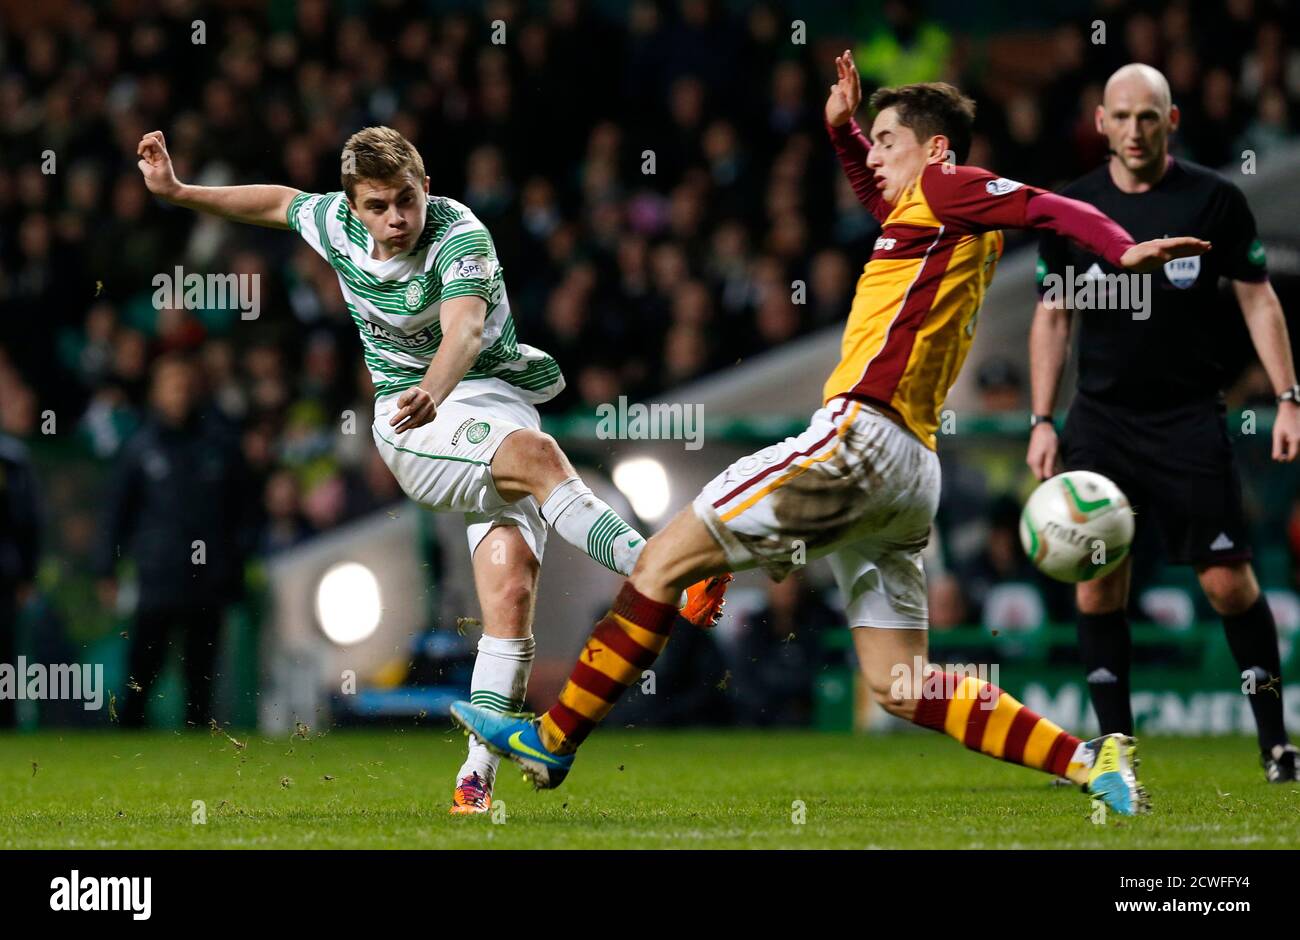 Celtic's James Forrest (L) is challenged by Motherwell's Stewart Carswell during their Scottish Premier League soccer match at Celtic Park, Glasgow, Scotland January 18, 2014. REUTERS/Russell Cheyne (BRITAIN - Tags: SPORT SOCCER) Stock Photo